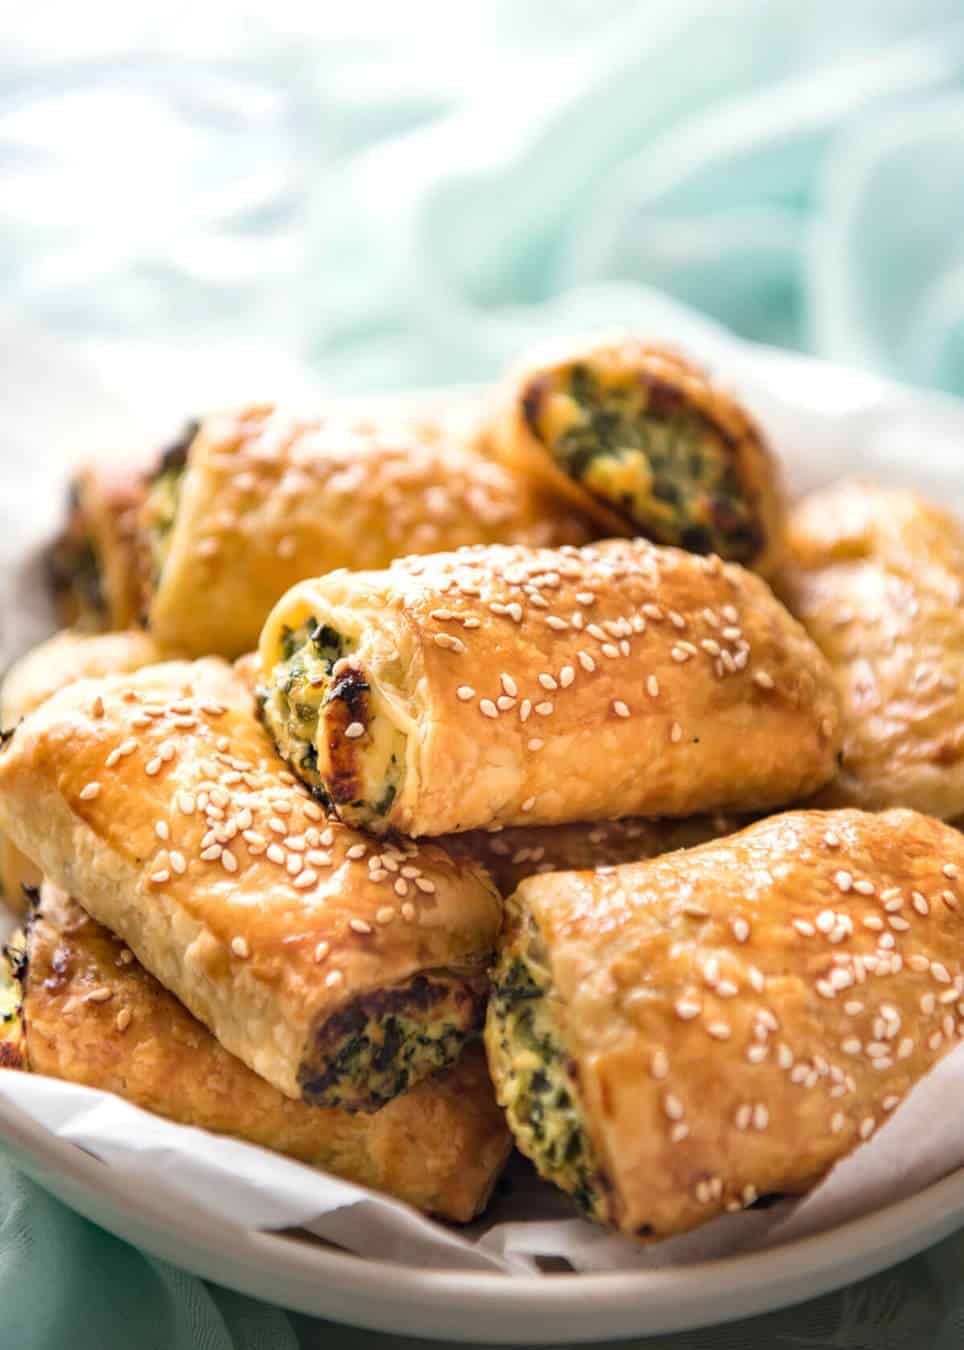 Spinach and Ricotta Rolls - a moist cheesy filling enclosed with buttery flaky puff pastry. Great make ahead for freezing! www.recipetineats.com